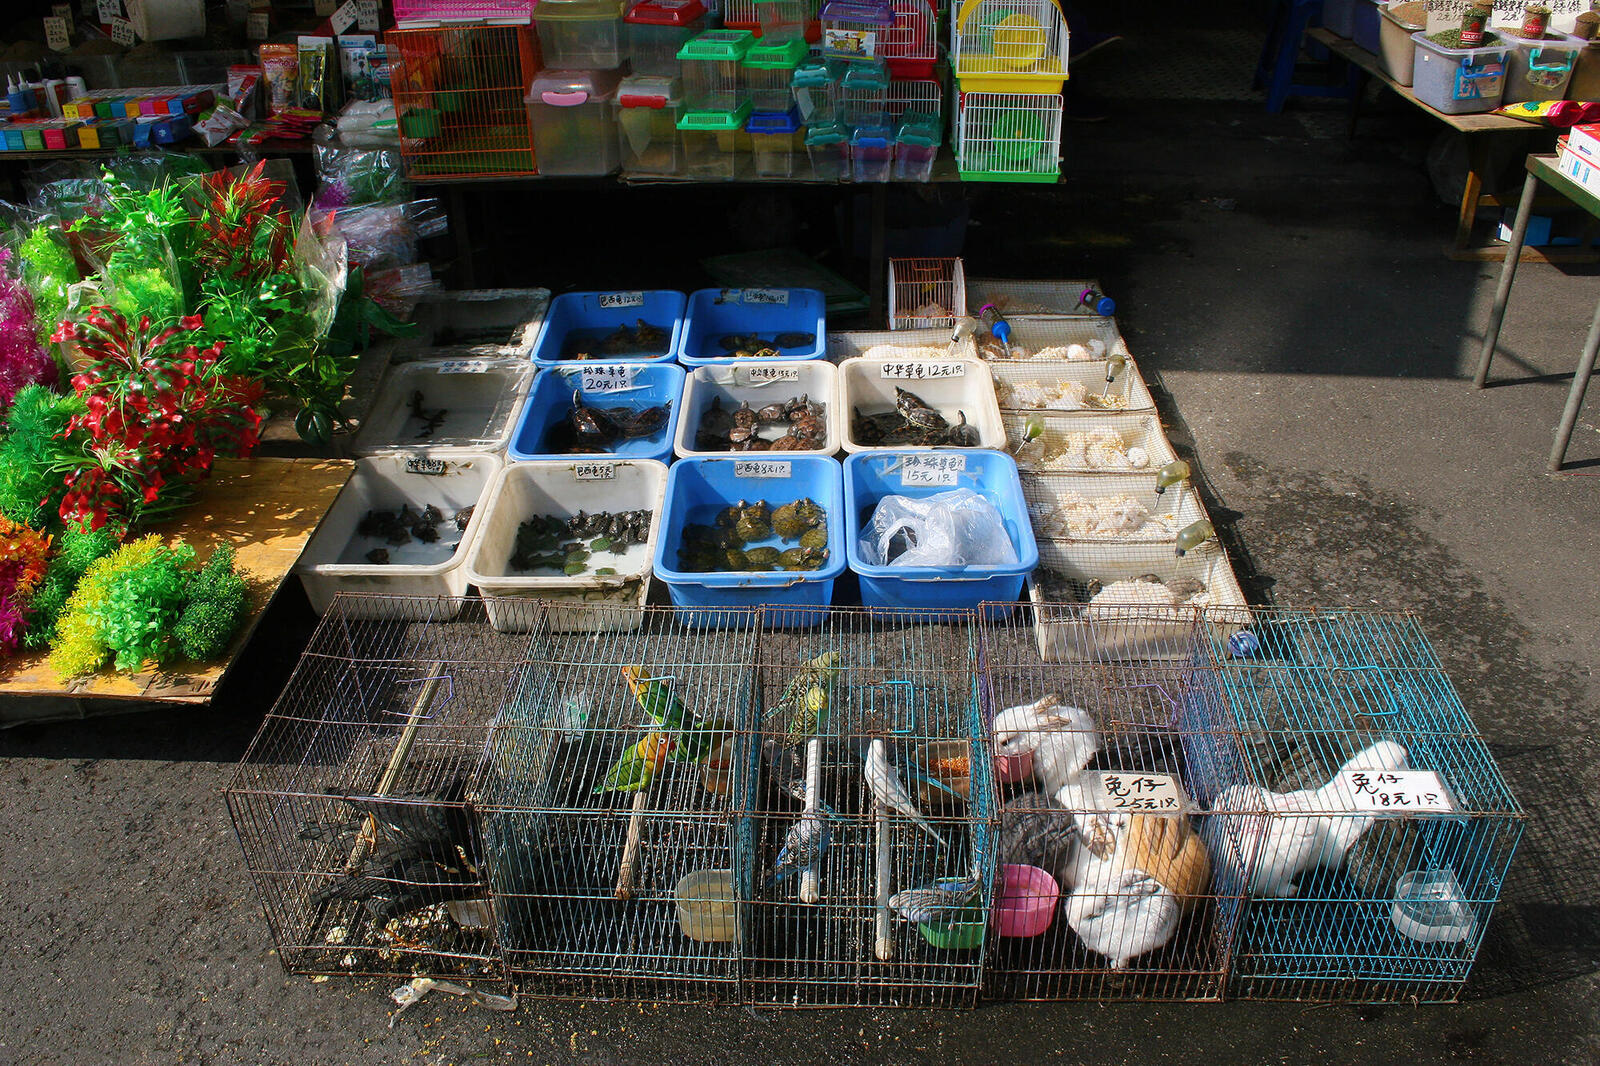 Live animals in cages at market